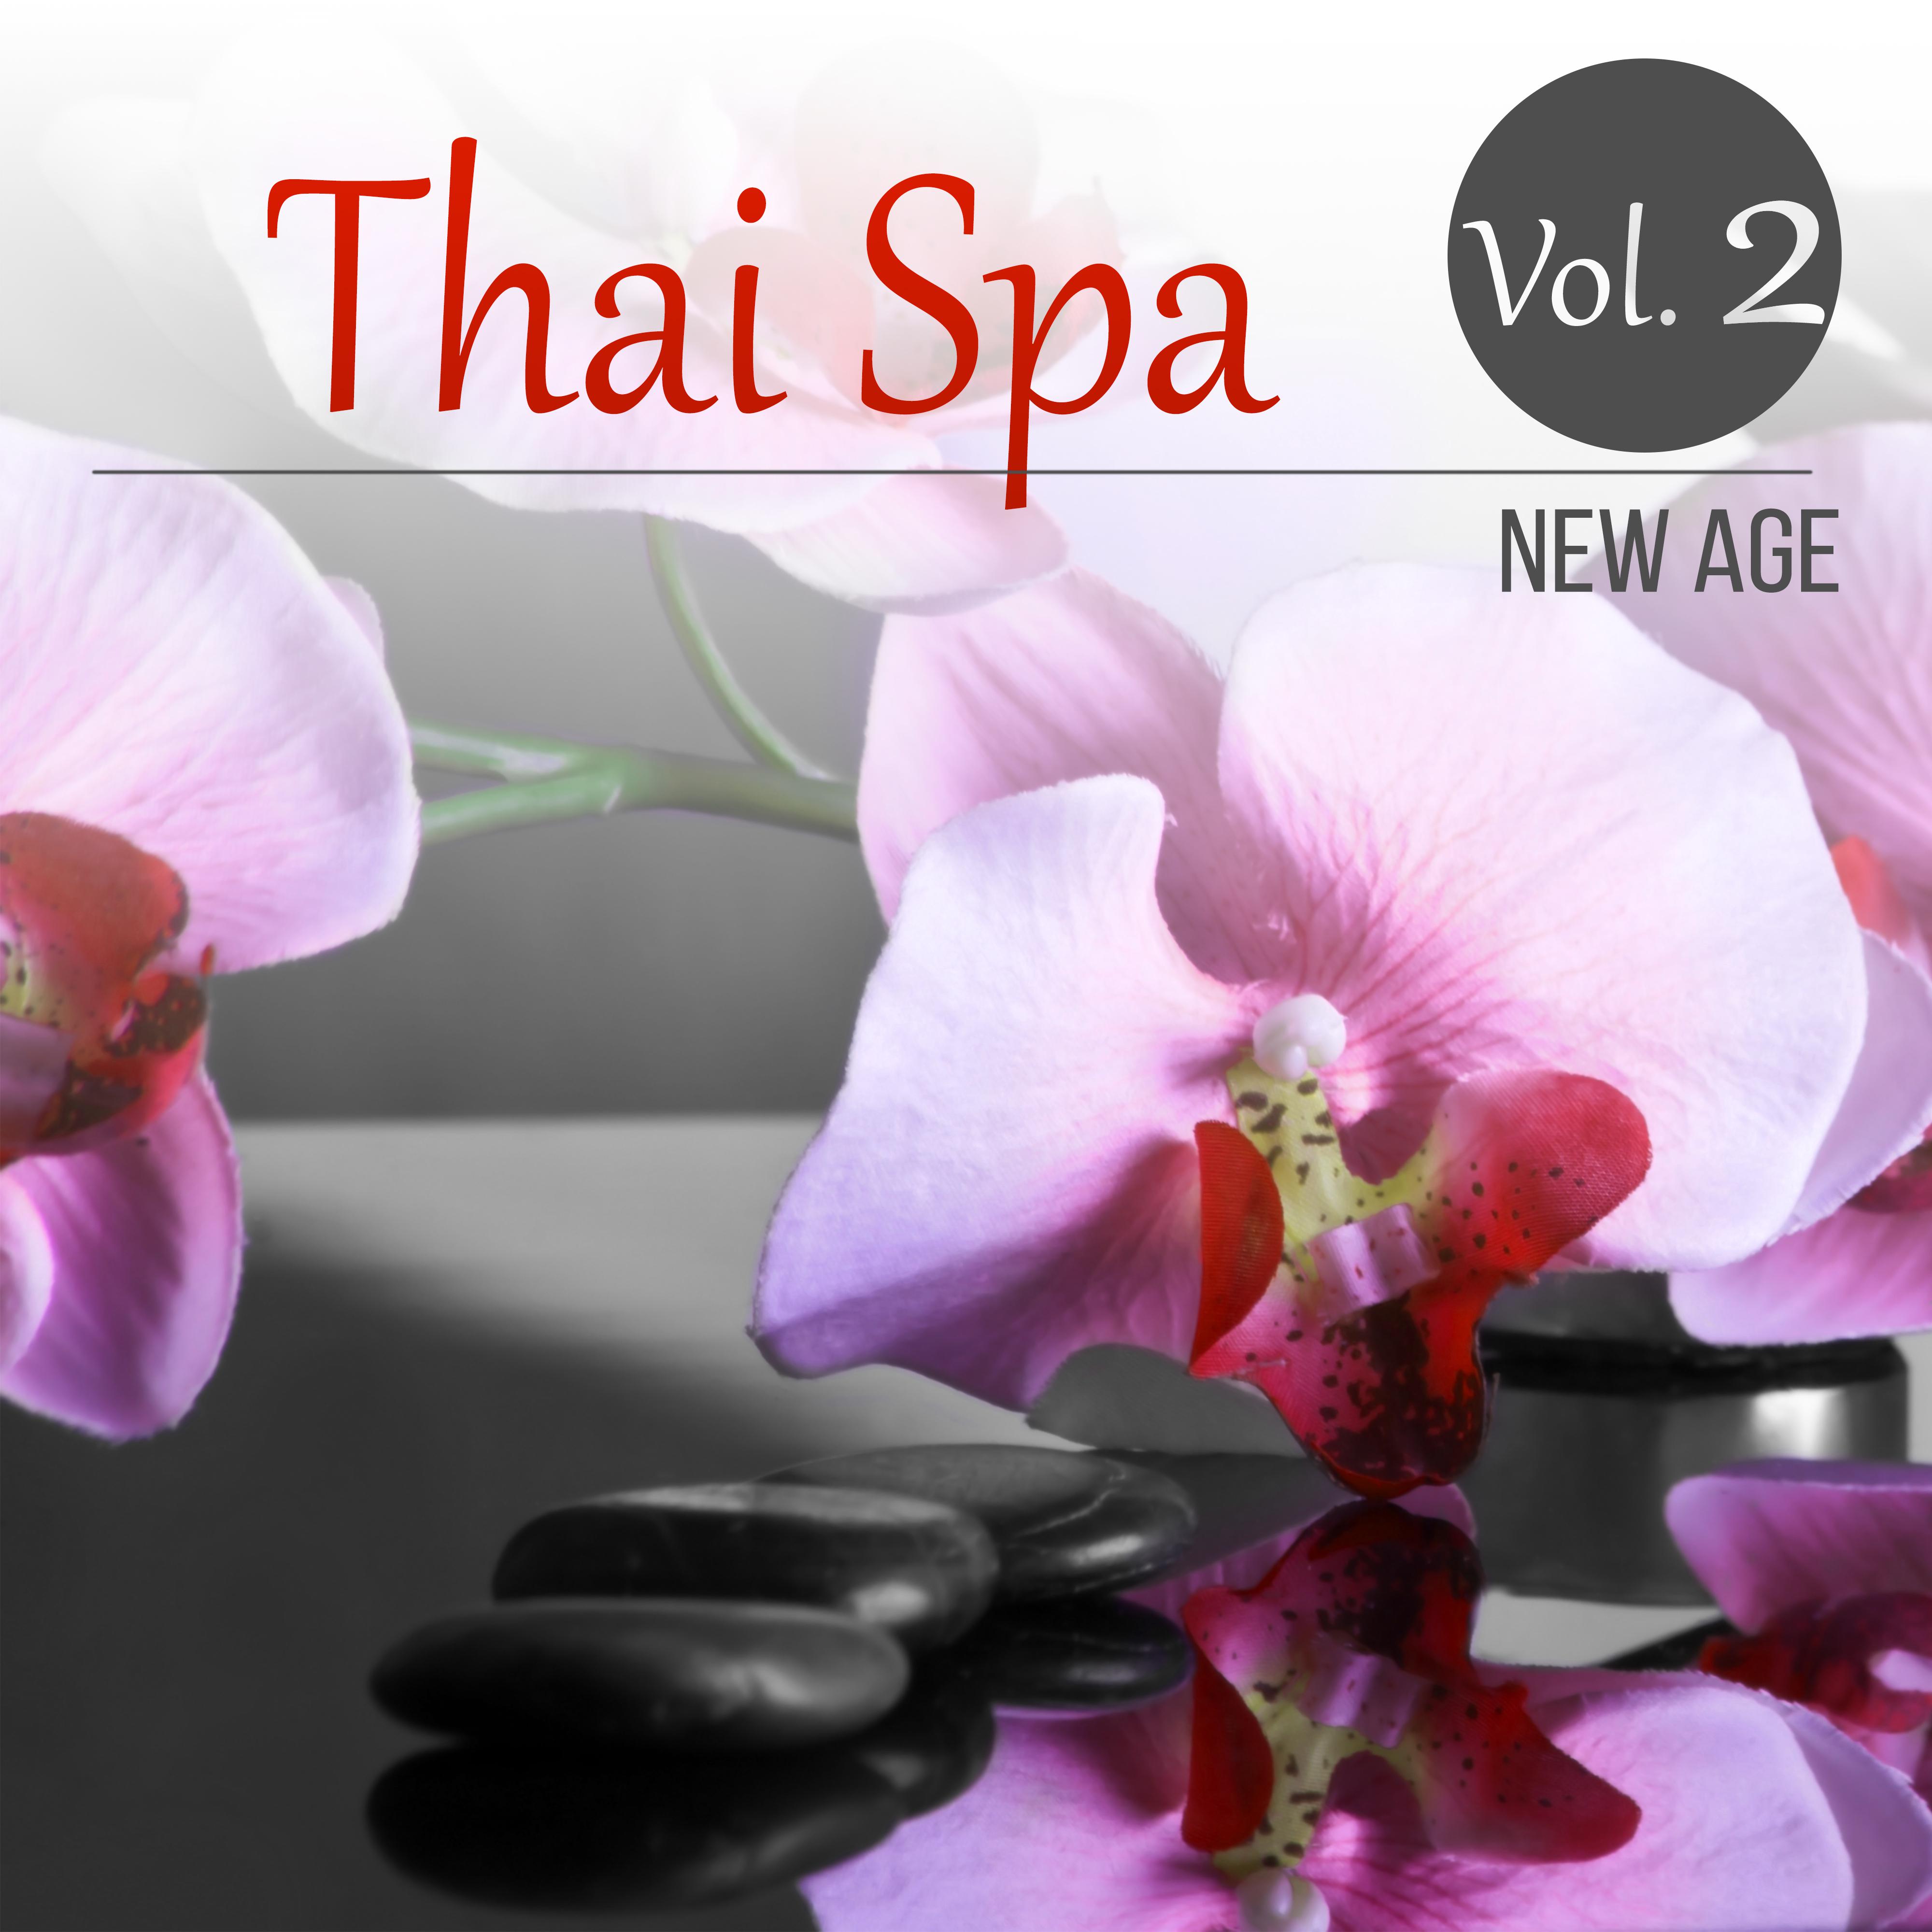 Thai Spa New Age Vol. 2 – Asian Sounds, Well Being, Asian Massage, Tranquility Music, Relaxing Music, Spa Wellness, Music Therapy